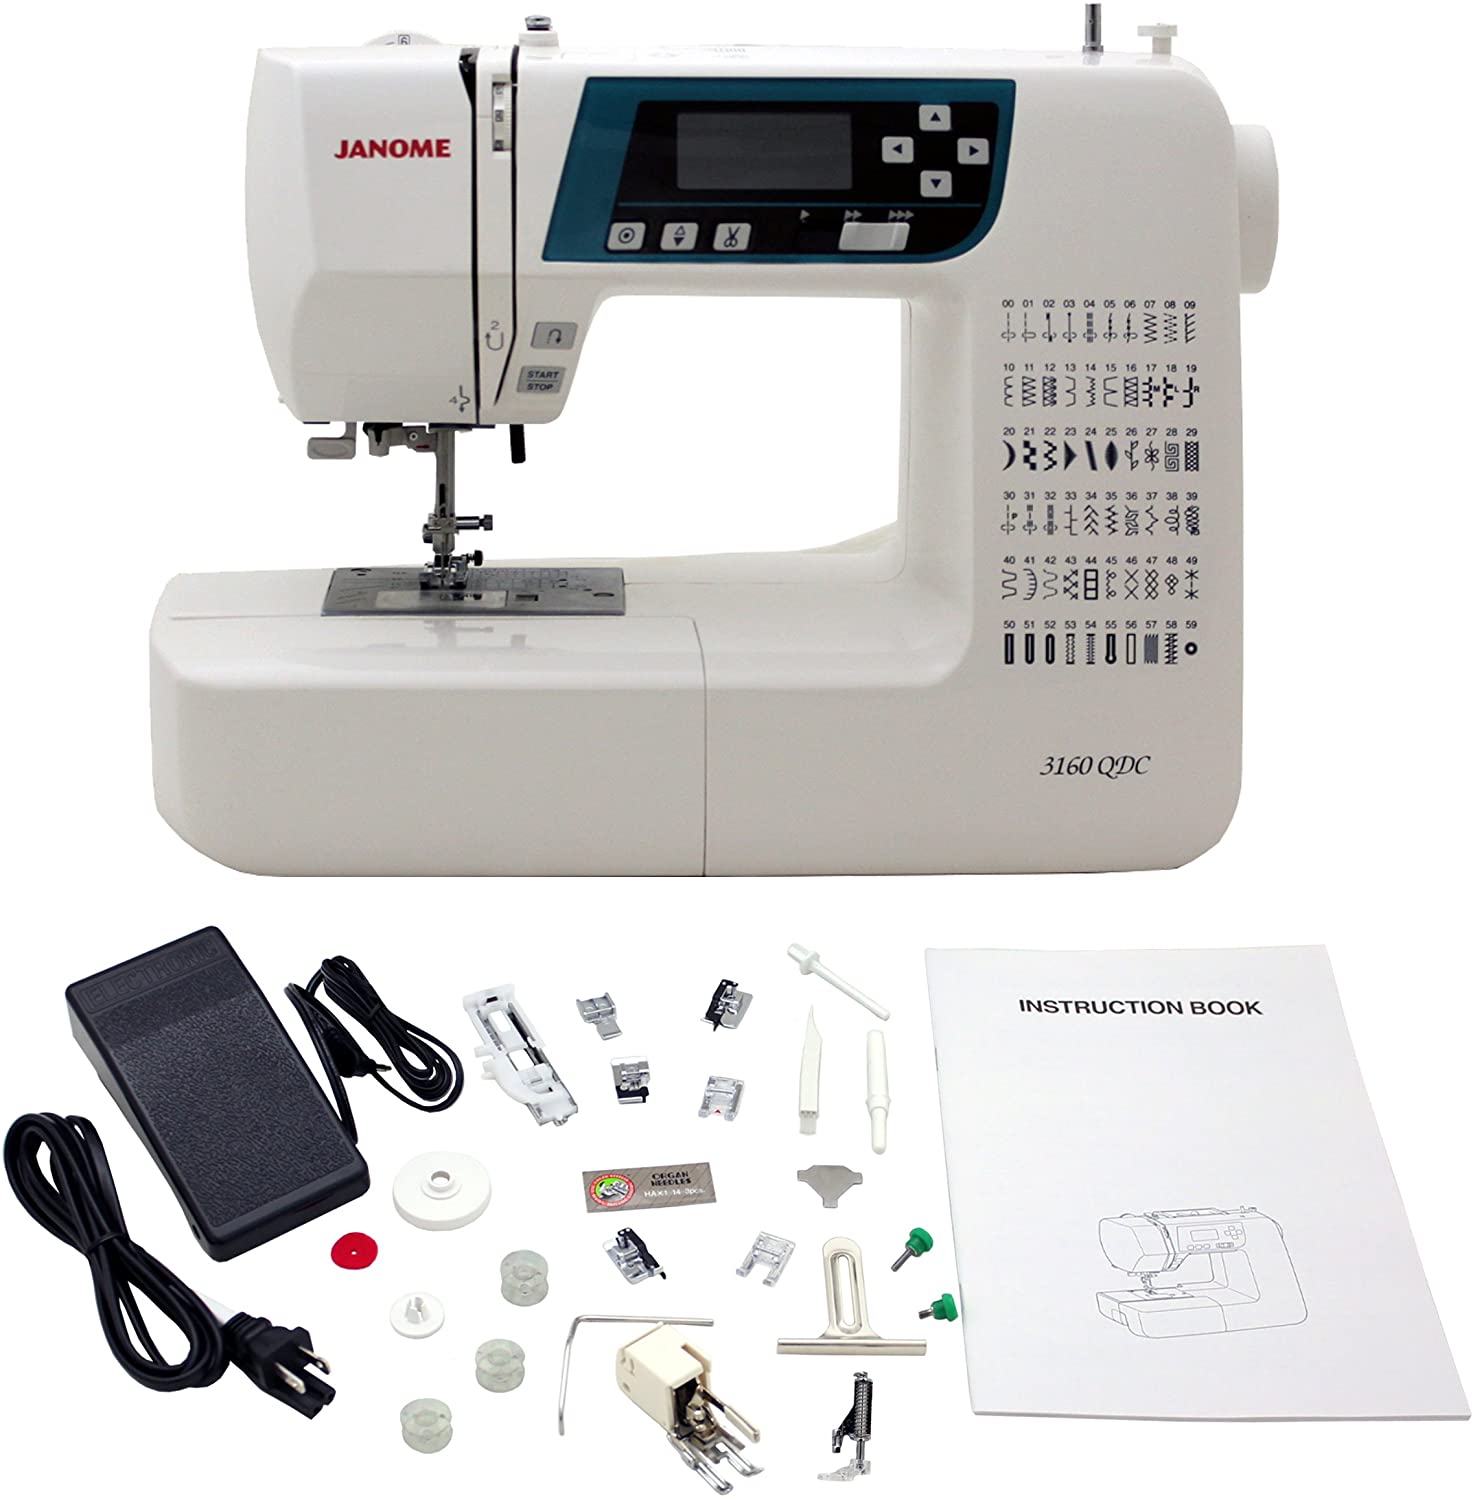 Janome 3160QDC Computerized Sewing Machine - Best Janome Sewing Machine for Quilting